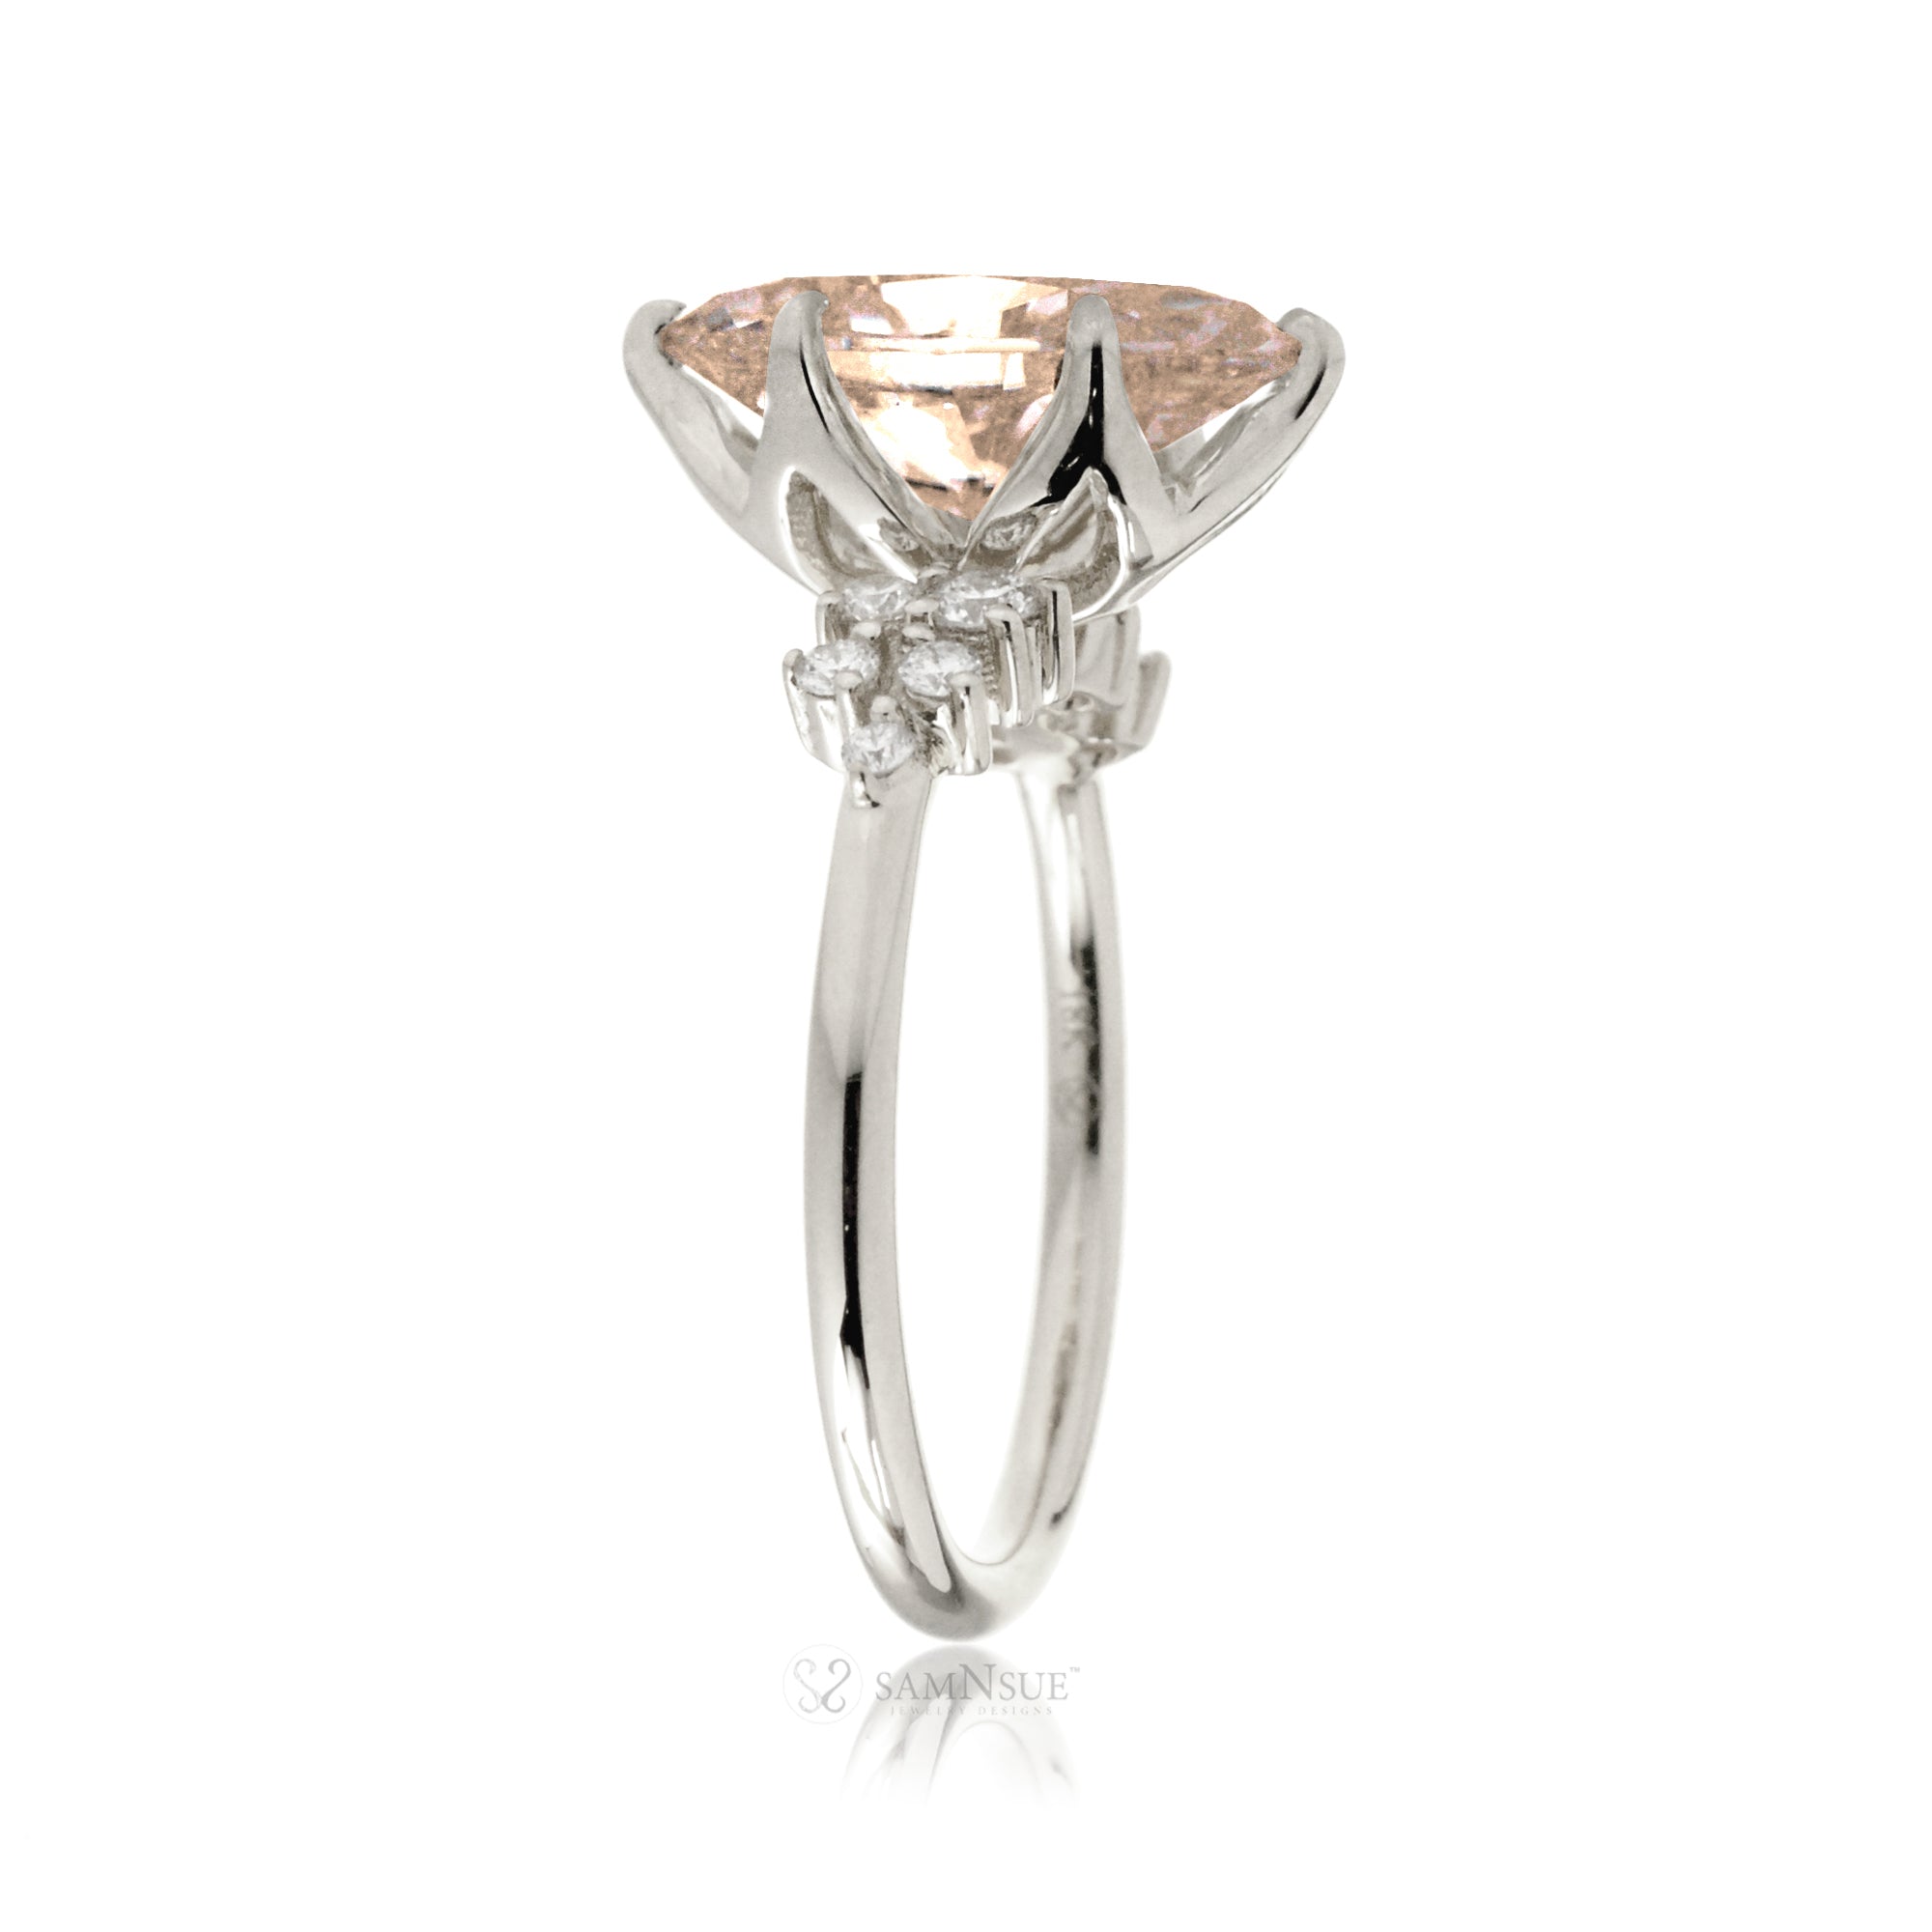 Oval cut morganite ring with diamond accent in white gold